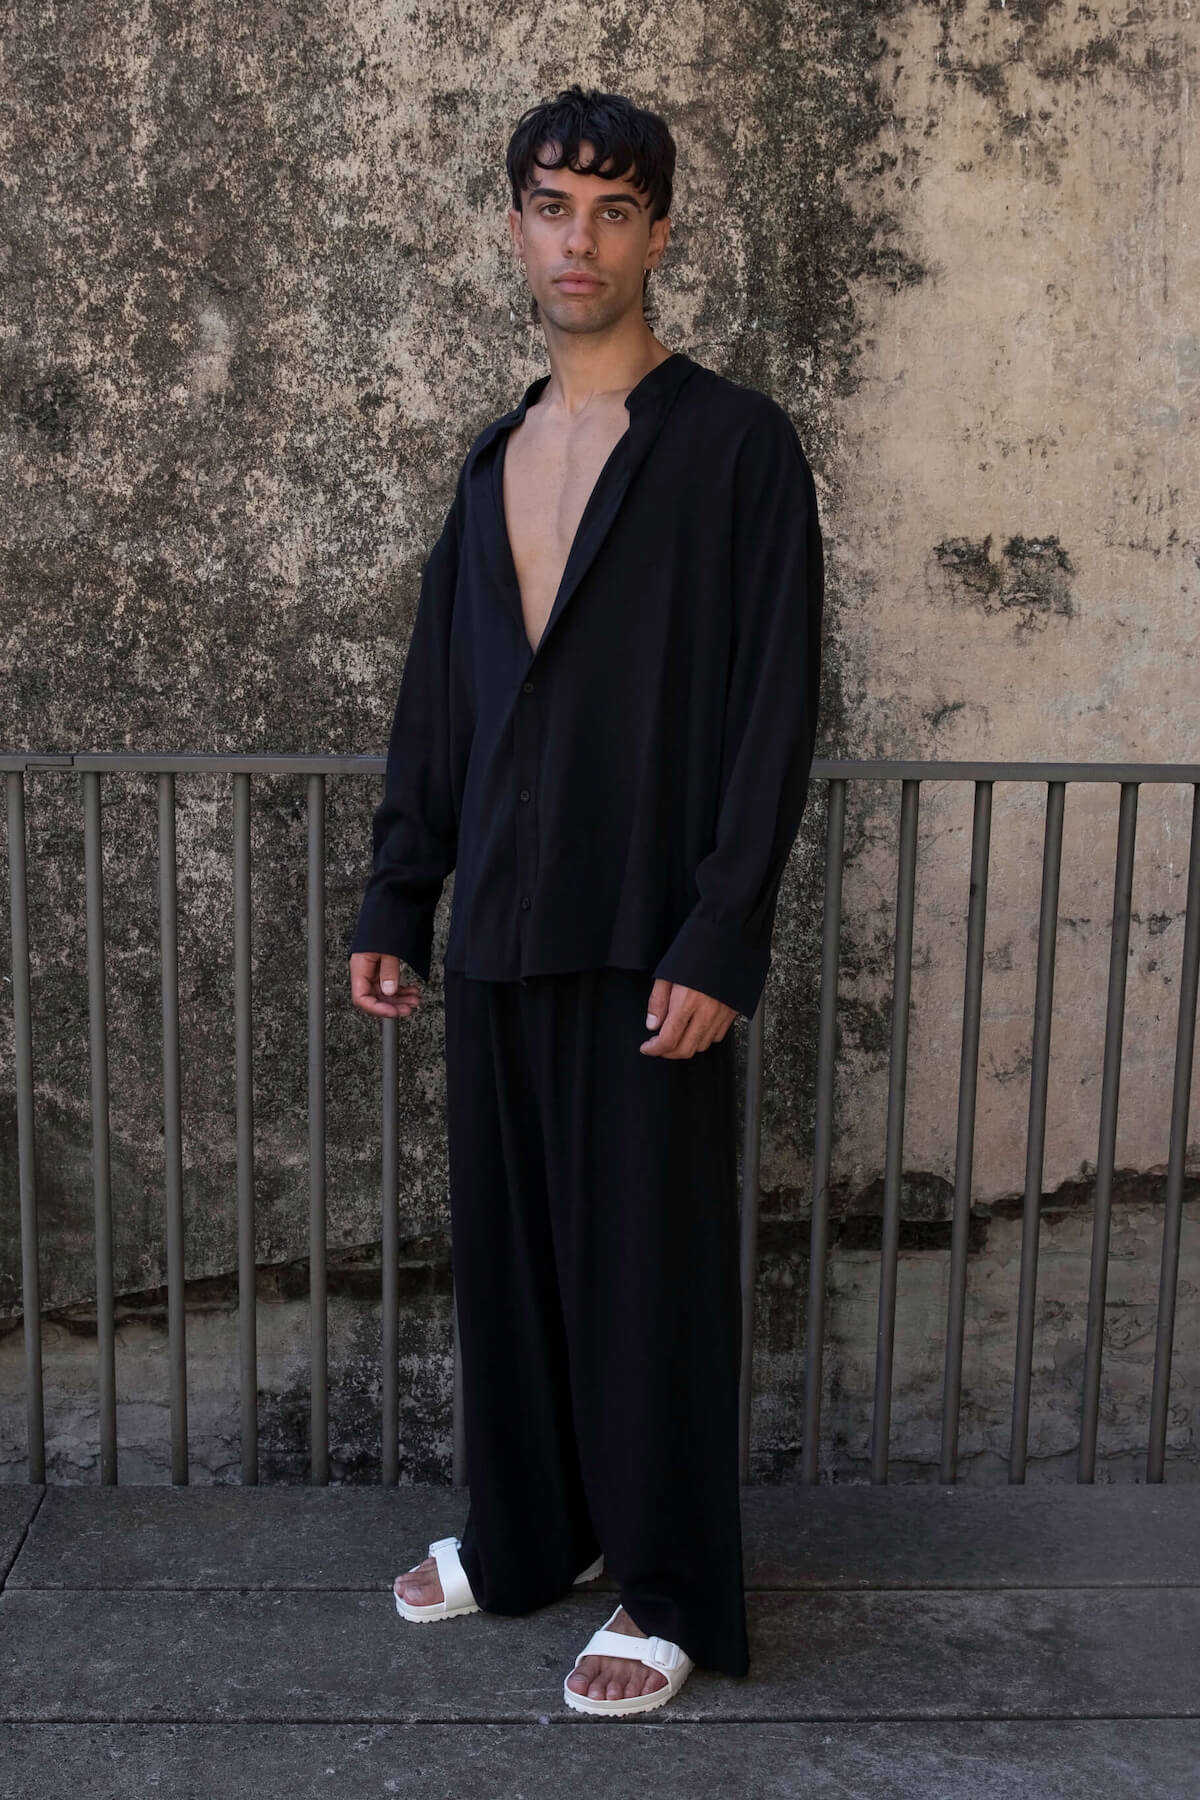 The Glade model wears men's high waisted pants and oversized shirt in black